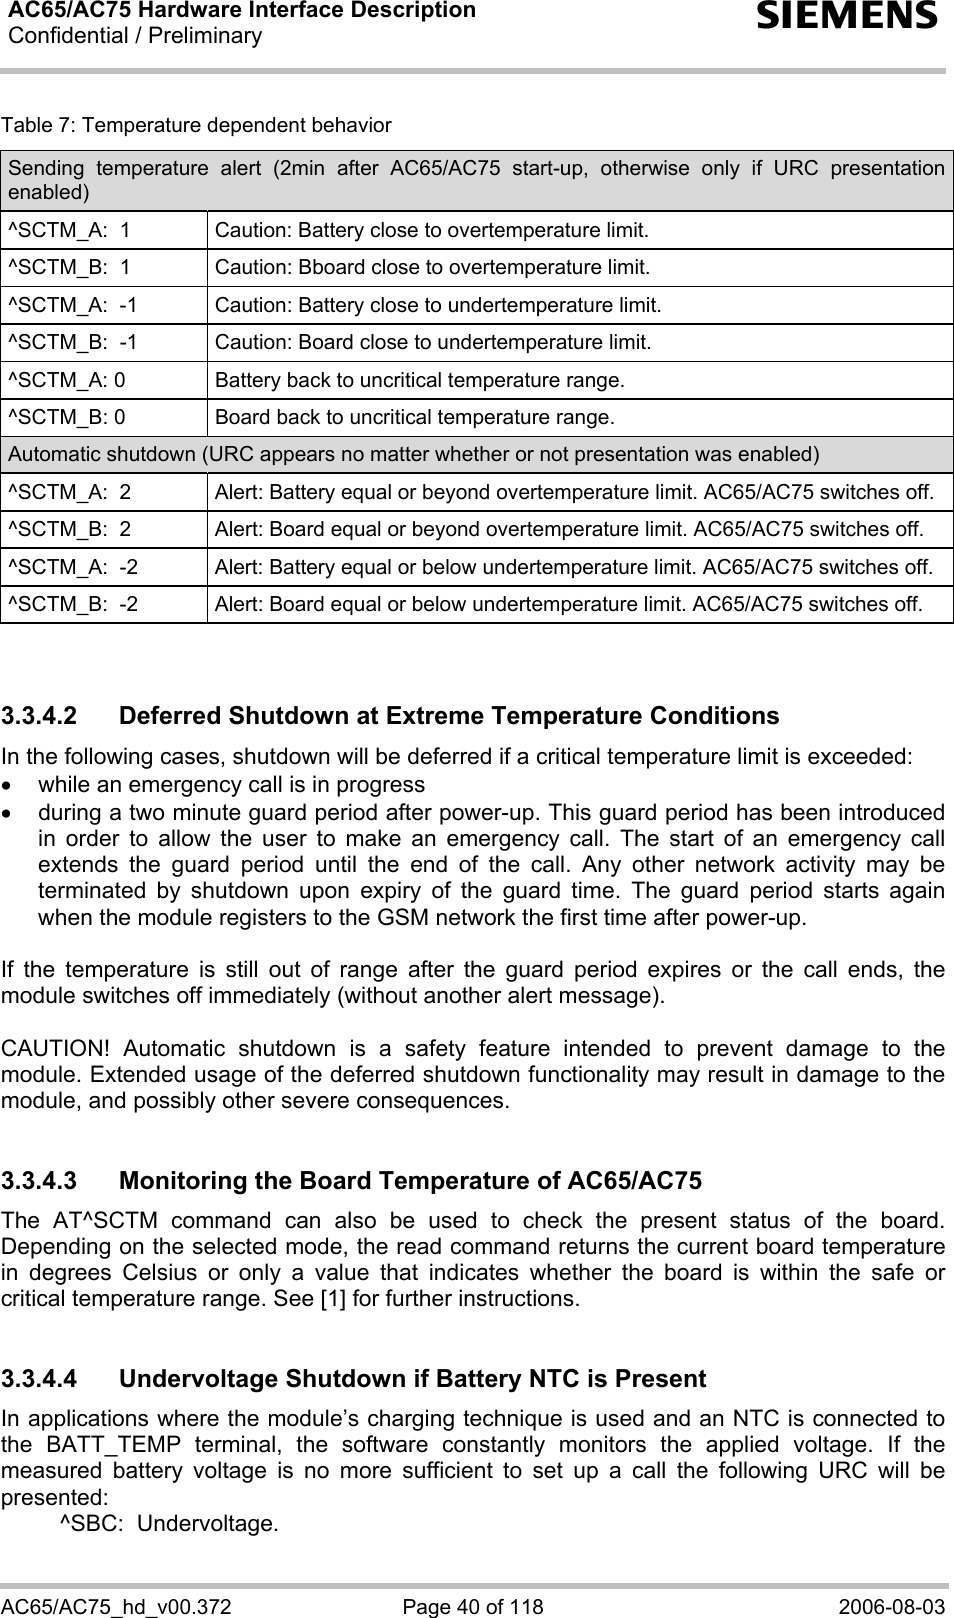 AC65/AC75 Hardware Interface Description Confidential / Preliminary  s AC65/AC75_hd_v00.372  Page 40 of 118  2006-08-03 Table 7: Temperature dependent behavior Sending temperature alert (2min after AC65/AC75 start-up, otherwise only if URC presentation enabled) ^SCTM_A:  1  Caution: Battery close to overtemperature limit. ^SCTM_B:  1  Caution: Bboard close to overtemperature limit. ^SCTM_A:  -1  Caution: Battery close to undertemperature limit. ^SCTM_B:  -1  Caution: Board close to undertemperature limit. ^SCTM_A: 0  Battery back to uncritical temperature range. ^SCTM_B: 0  Board back to uncritical temperature range. Automatic shutdown (URC appears no matter whether or not presentation was enabled) ^SCTM_A:  2  Alert: Battery equal or beyond overtemperature limit. AC65/AC75 switches off. ^SCTM_B:  2  Alert: Board equal or beyond overtemperature limit. AC65/AC75 switches off. ^SCTM_A:  -2  Alert: Battery equal or below undertemperature limit. AC65/AC75 switches off. ^SCTM_B:  -2  Alert: Board equal or below undertemperature limit. AC65/AC75 switches off.   3.3.4.2  Deferred Shutdown at Extreme Temperature Conditions In the following cases, shutdown will be deferred if a critical temperature limit is exceeded: •  while an emergency call is in progress •  during a two minute guard period after power-up. This guard period has been introduced in order to allow the user to make an emergency call. The start of an emergency call extends the guard period until the end of the call. Any other network activity may be terminated by shutdown upon expiry of the guard time. The guard period starts again when the module registers to the GSM network the first time after power-up.  If the temperature is still out of range after the guard period expires or the call ends, the module switches off immediately (without another alert message).  CAUTION! Automatic shutdown is a safety feature intended to prevent damage to the module. Extended usage of the deferred shutdown functionality may result in damage to the module, and possibly other severe consequences.  3.3.4.3  Monitoring the Board Temperature of AC65/AC75 The AT^SCTM command can also be used to check the present status of the board. Depending on the selected mode, the read command returns the current board temperature in degrees Celsius or only a value that indicates whether the board is within the safe or critical temperature range. See [1] for further instructions.  3.3.4.4  Undervoltage Shutdown if Battery NTC is Present In applications where the module’s charging technique is used and an NTC is connected to the BATT_TEMP terminal, the software constantly monitors the applied voltage. If the measured battery voltage is no more sufficient to set up a call the following URC will be presented:    ^SBC:  Undervoltage.  